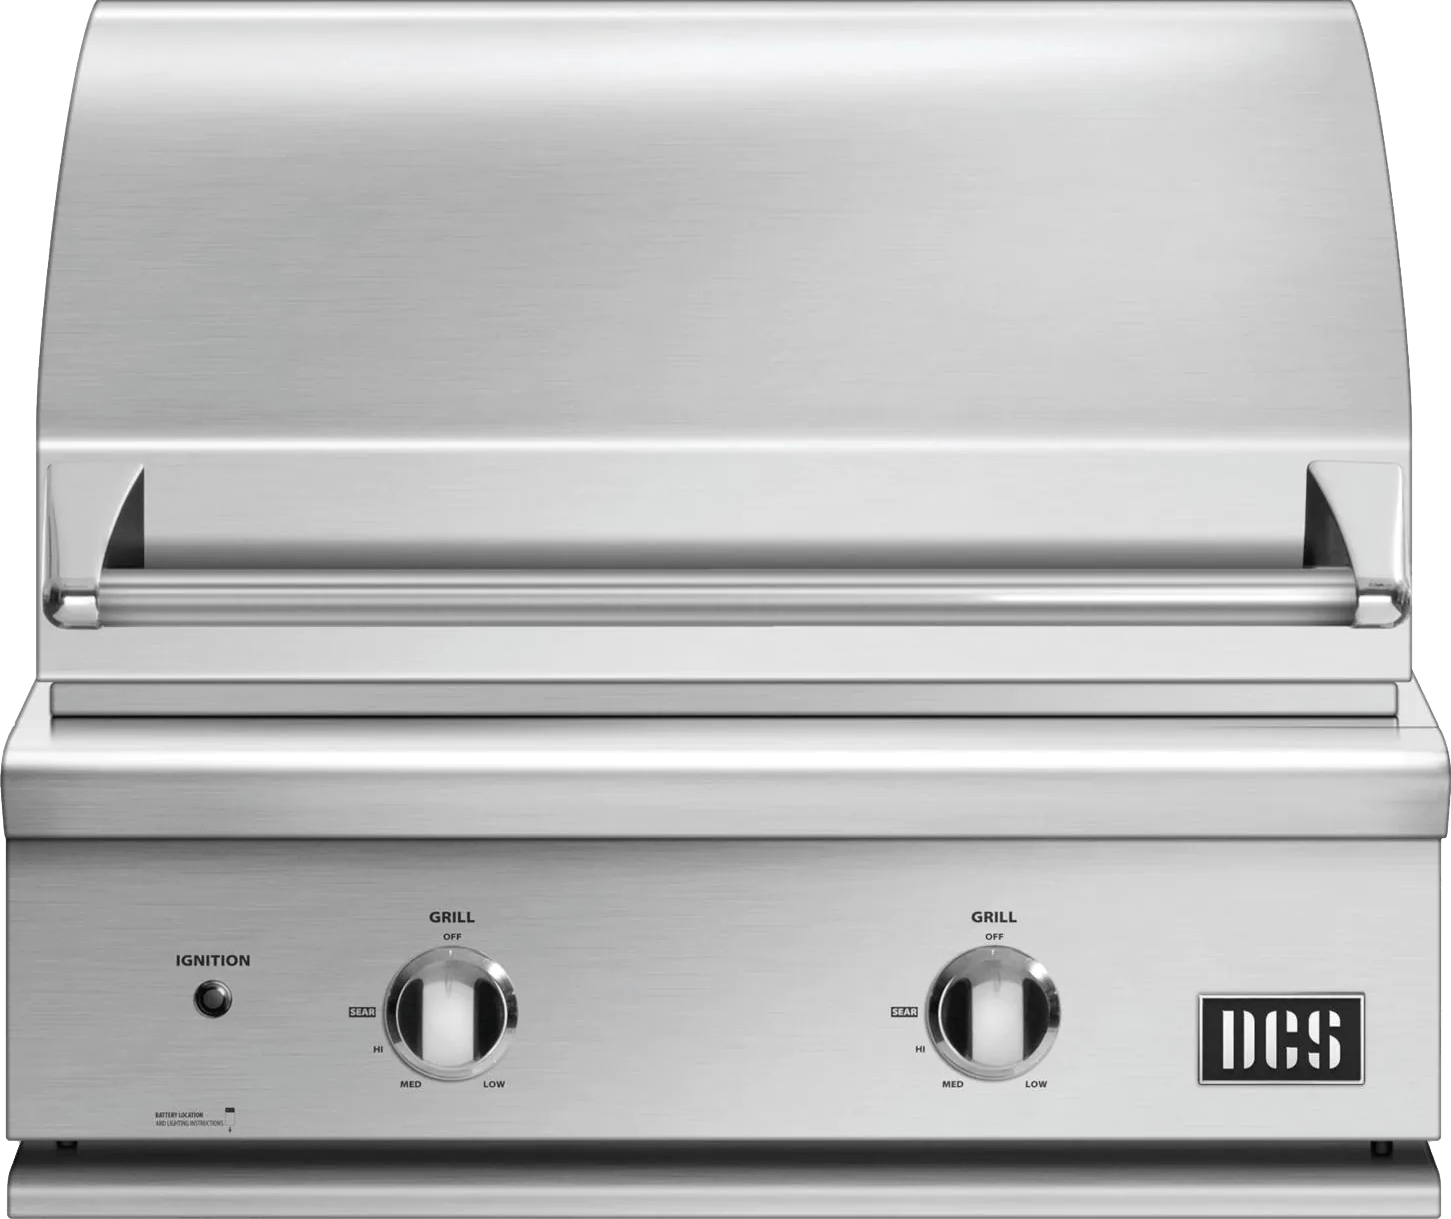 DCS Series 7 Traditional Built-in Gas Grill · 30 in. · Natural Gas